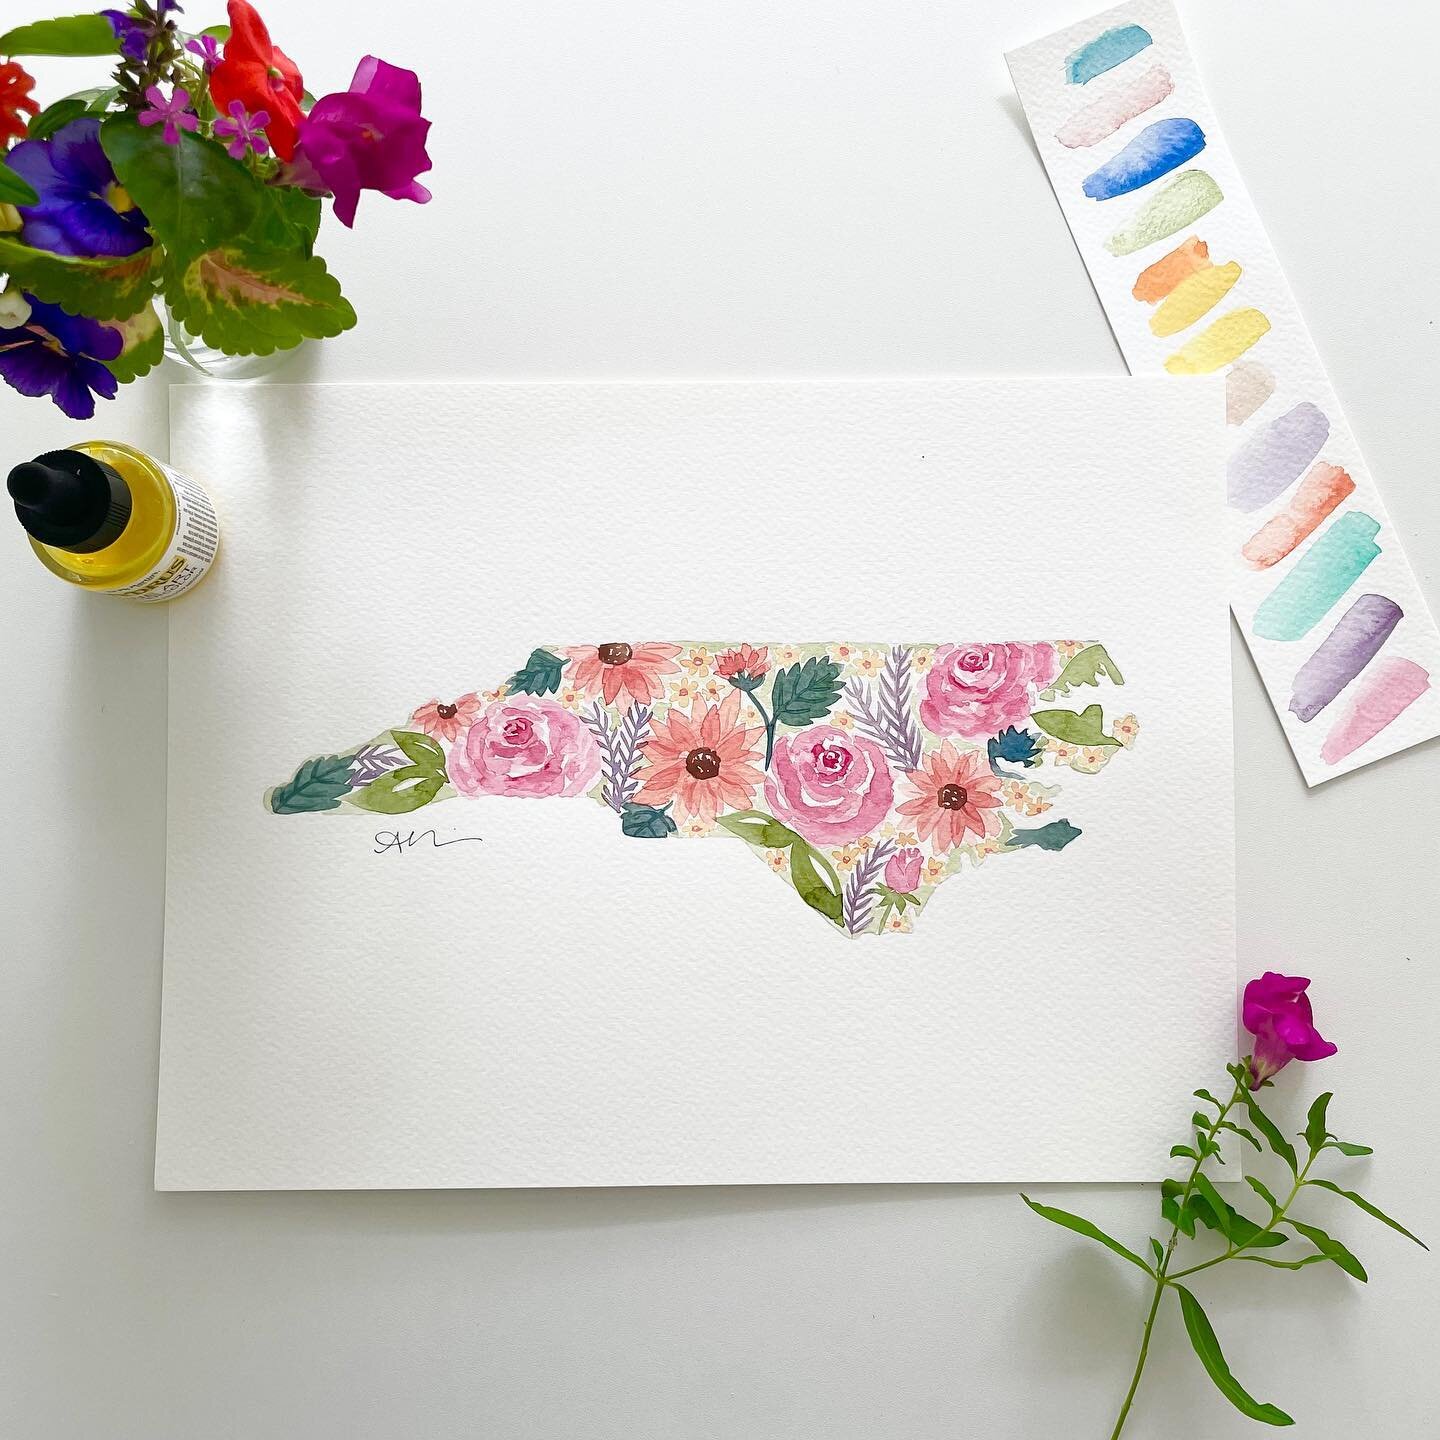 One of my most popular classes is back at @crafthabitraleigh this month! Come dabble in watercolor florals and show our state some love in this Watercolor Floral NC class, Sun. Aug. 28th! Link in my profile to register and snag your spot- space is li